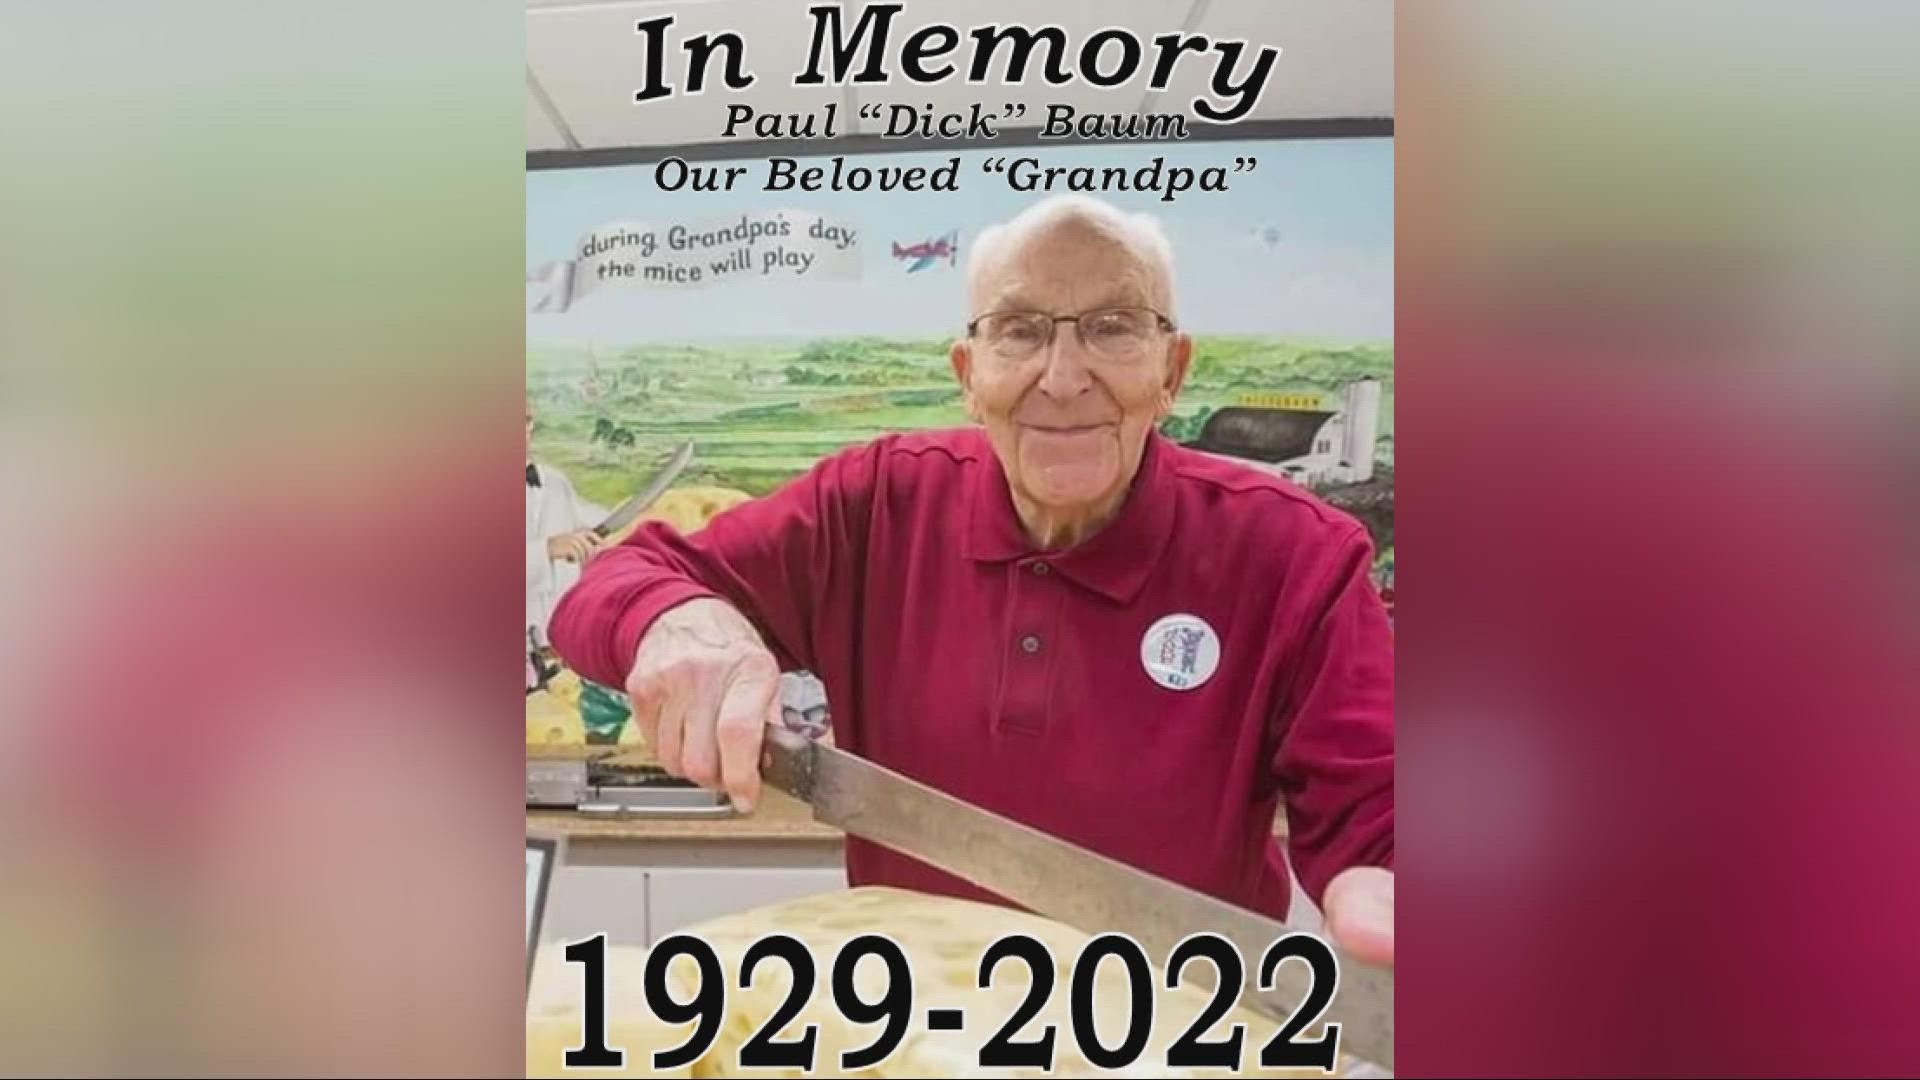 The beloved business posted on Facebook saying "Grandpa" Baum passed away just four days after celebrating 73 years of marriage with his wife.